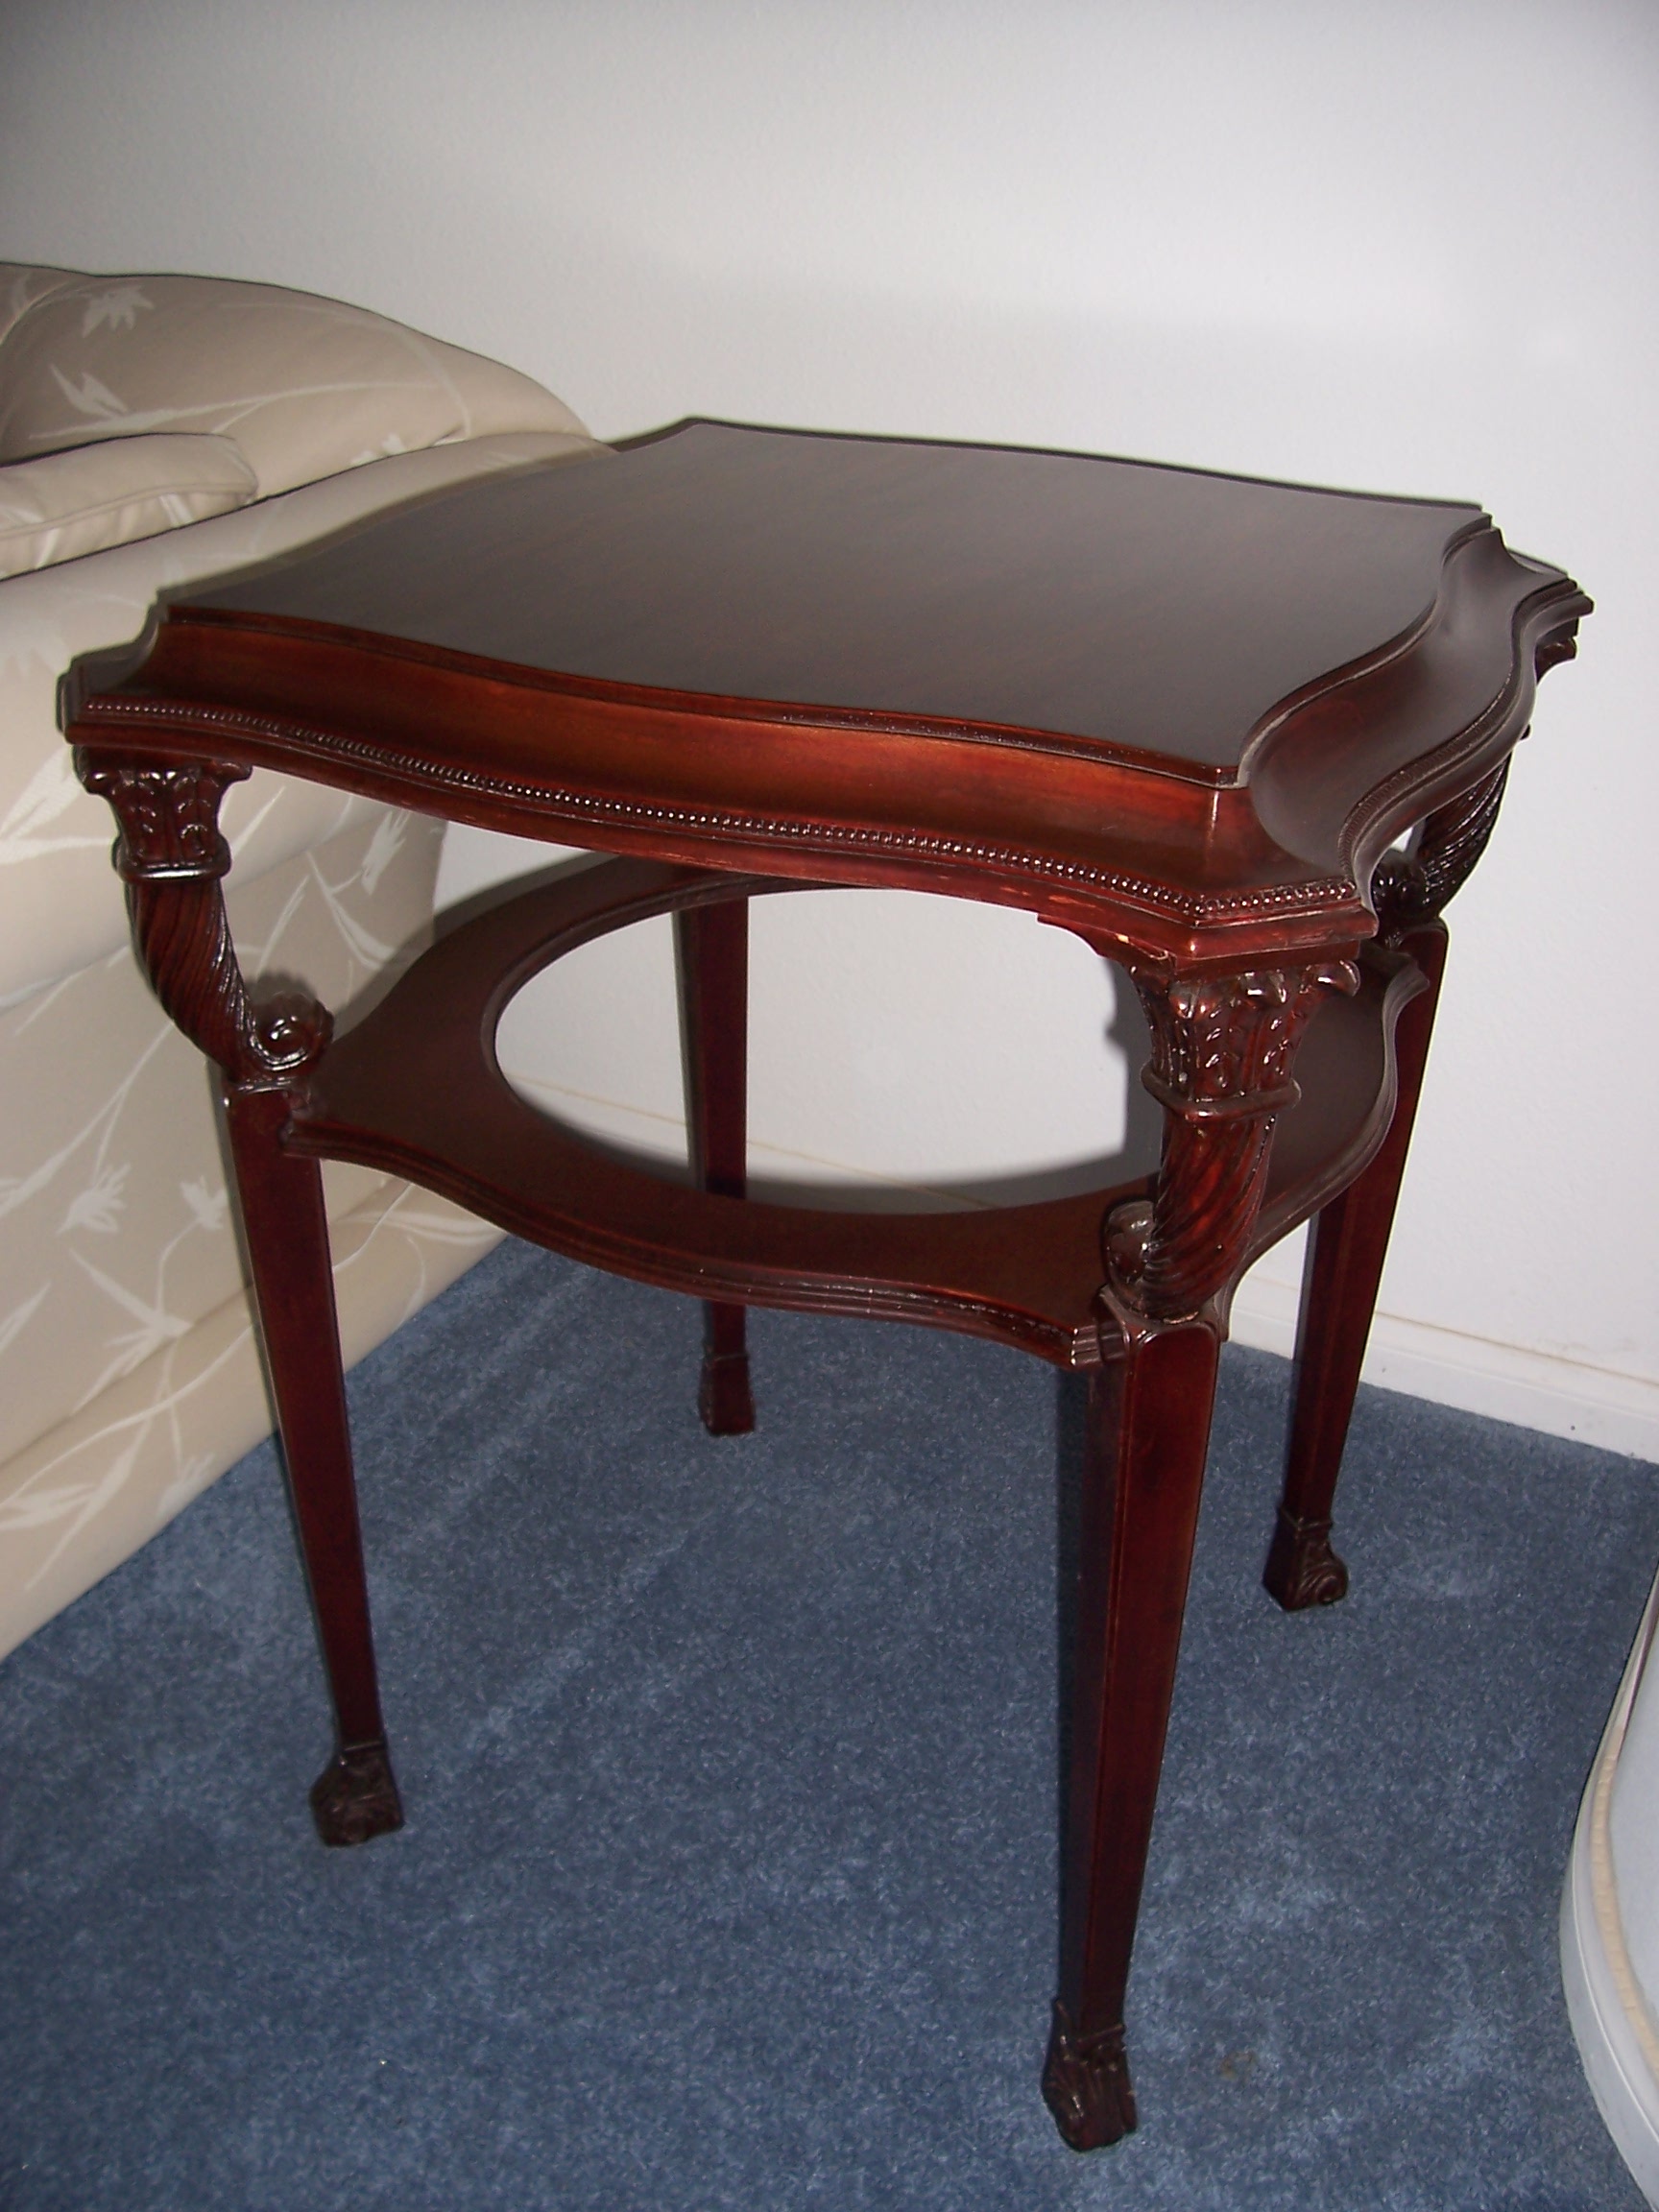 Classy end table